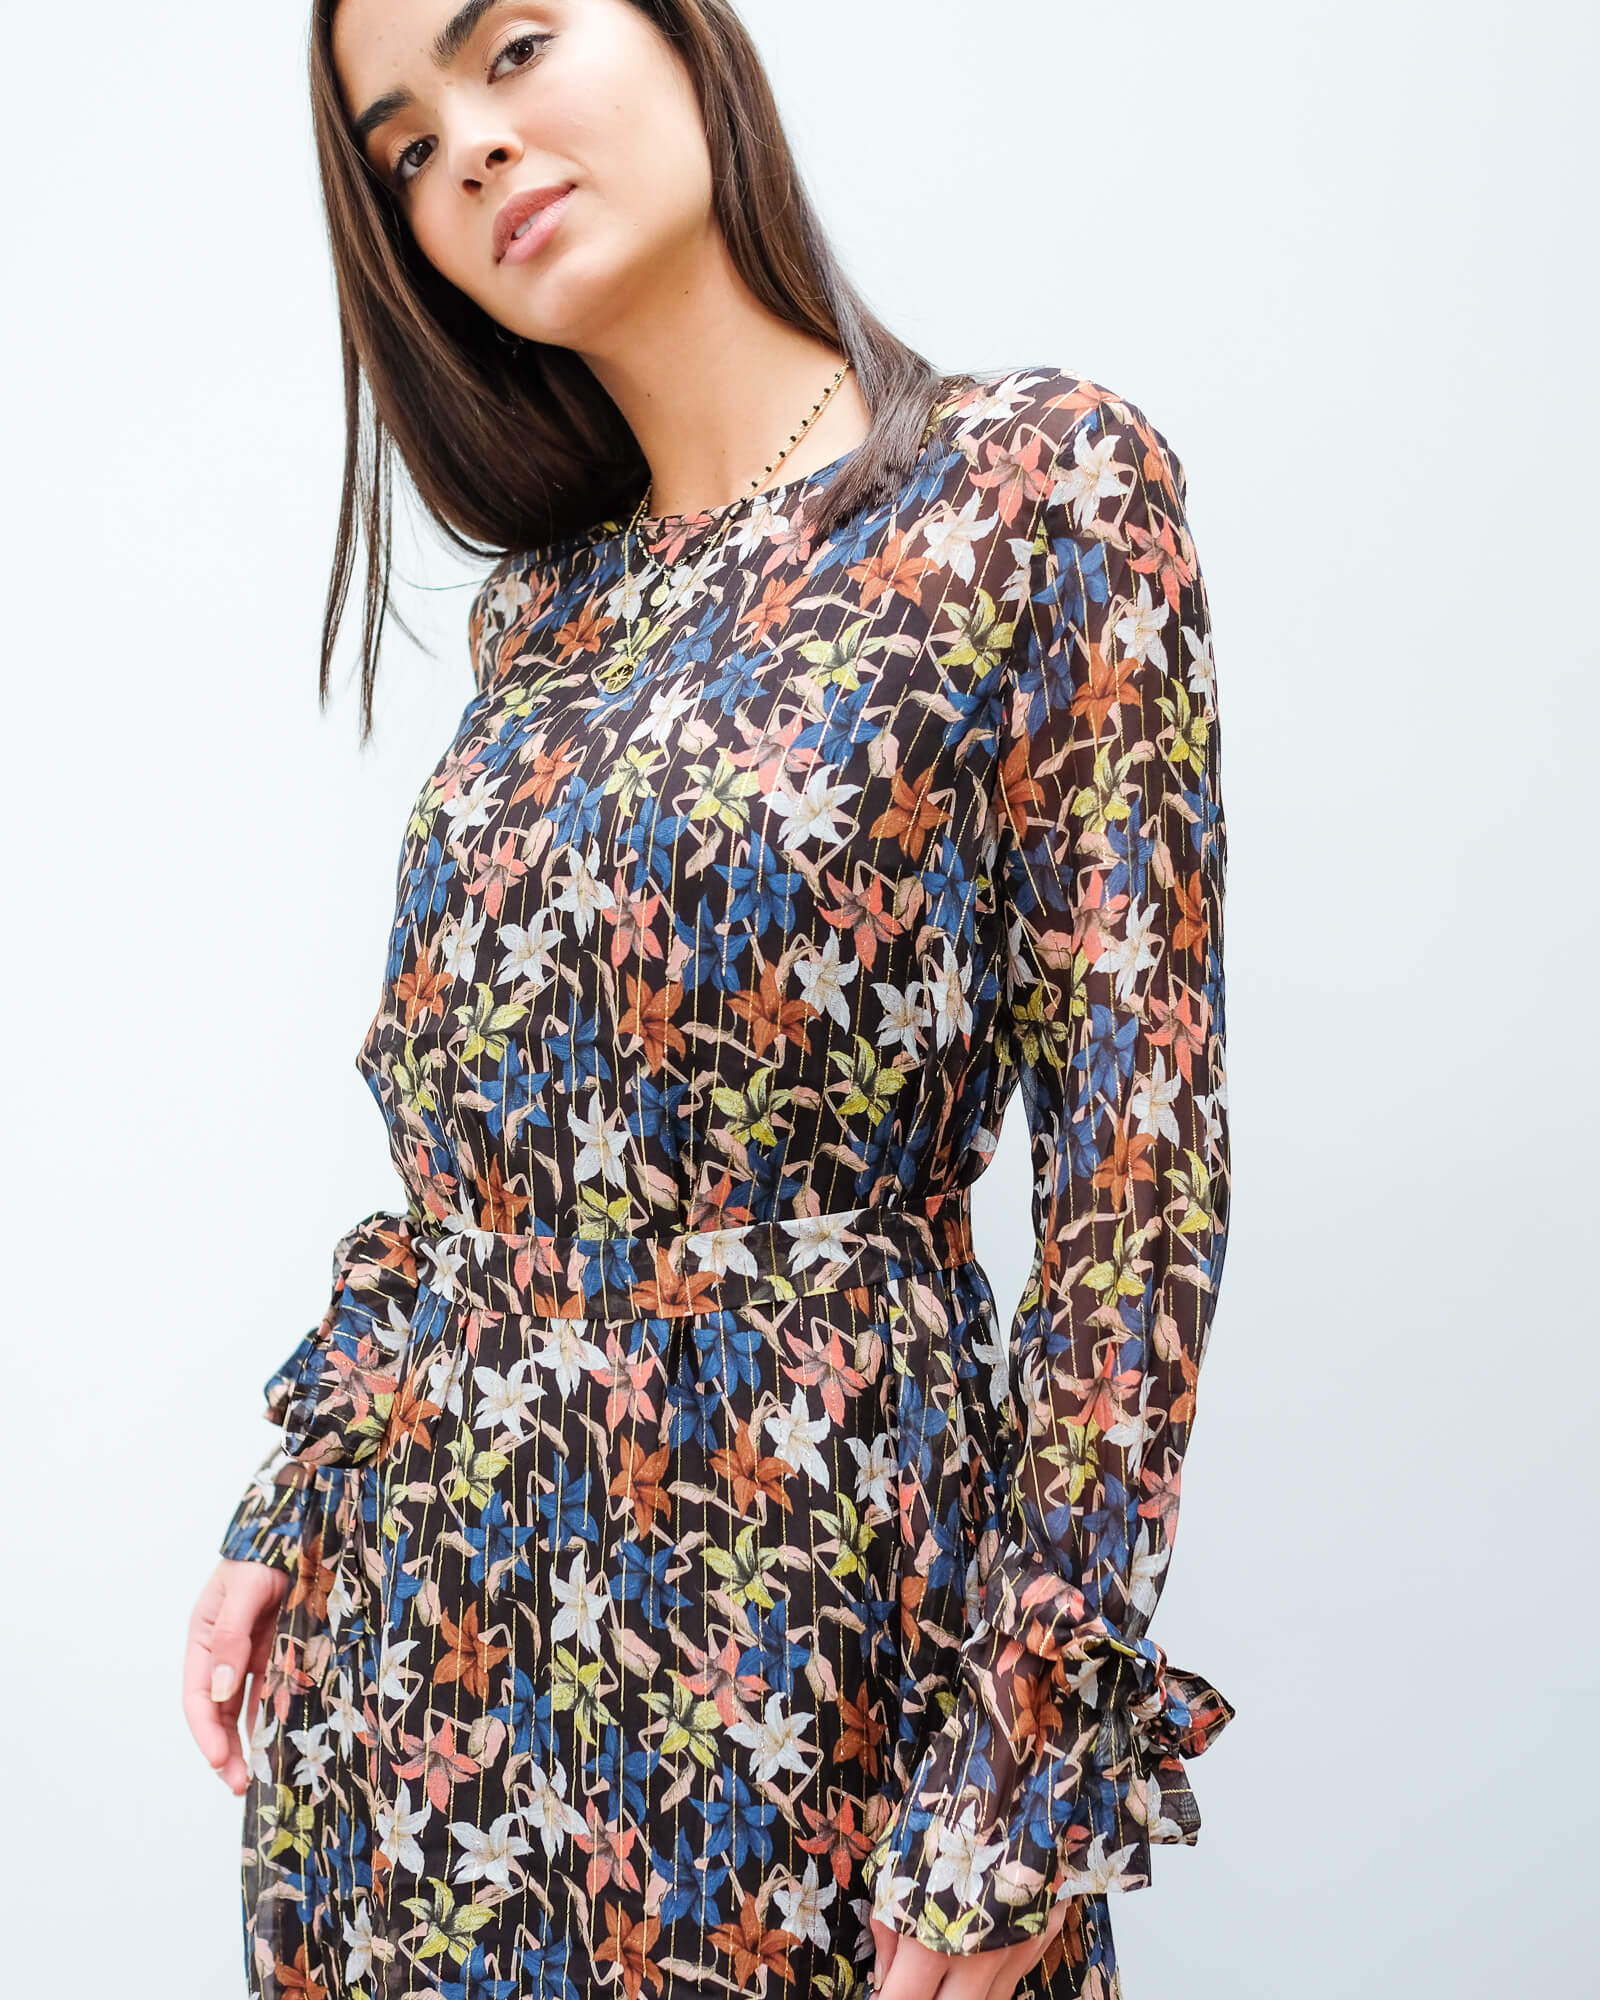 M Know floral dress in black